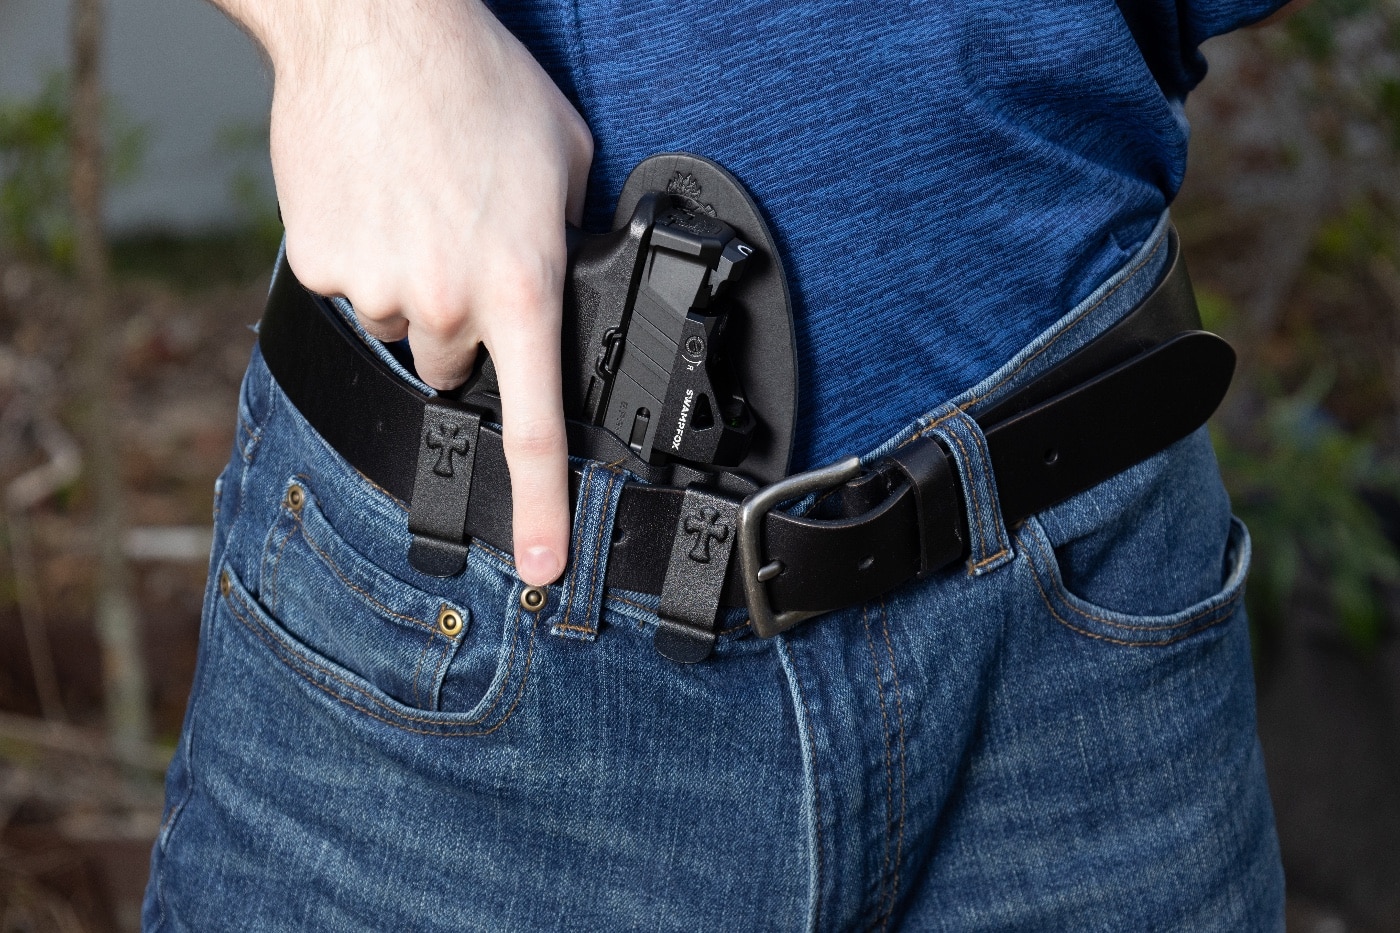 In this photo, we see the author carrying Echelon in the IWB position.  Inside-the-waistband holsters, a category of handgun holster, provides ready access to the gun in concealed carry.